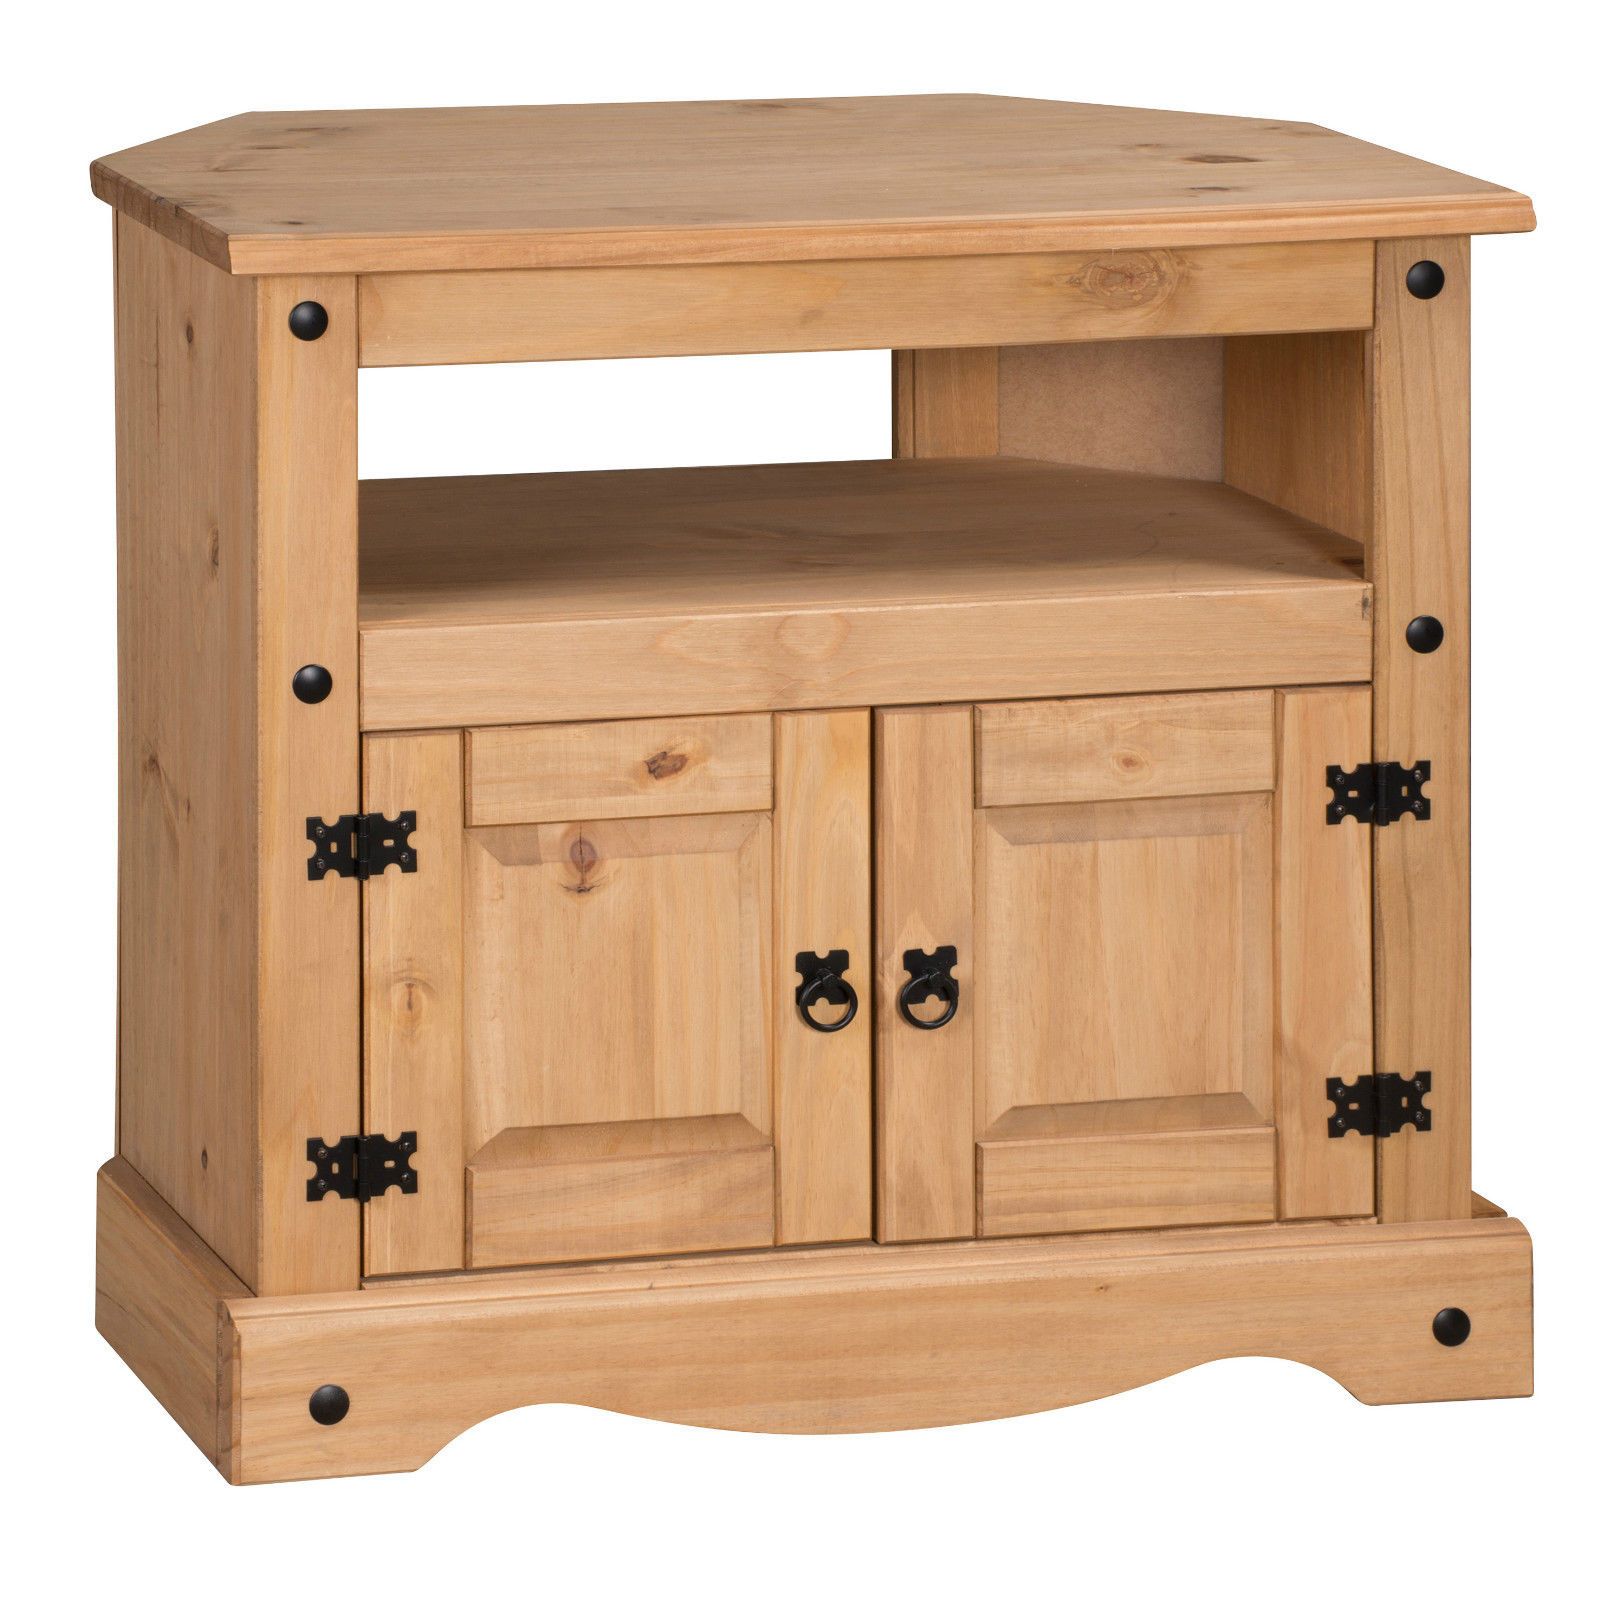 H4home Rustic Corner Tv Stand Solid Wood | H4home Furnitures Pertaining To Oak Corner Tv Stands (Photo 11 of 28)